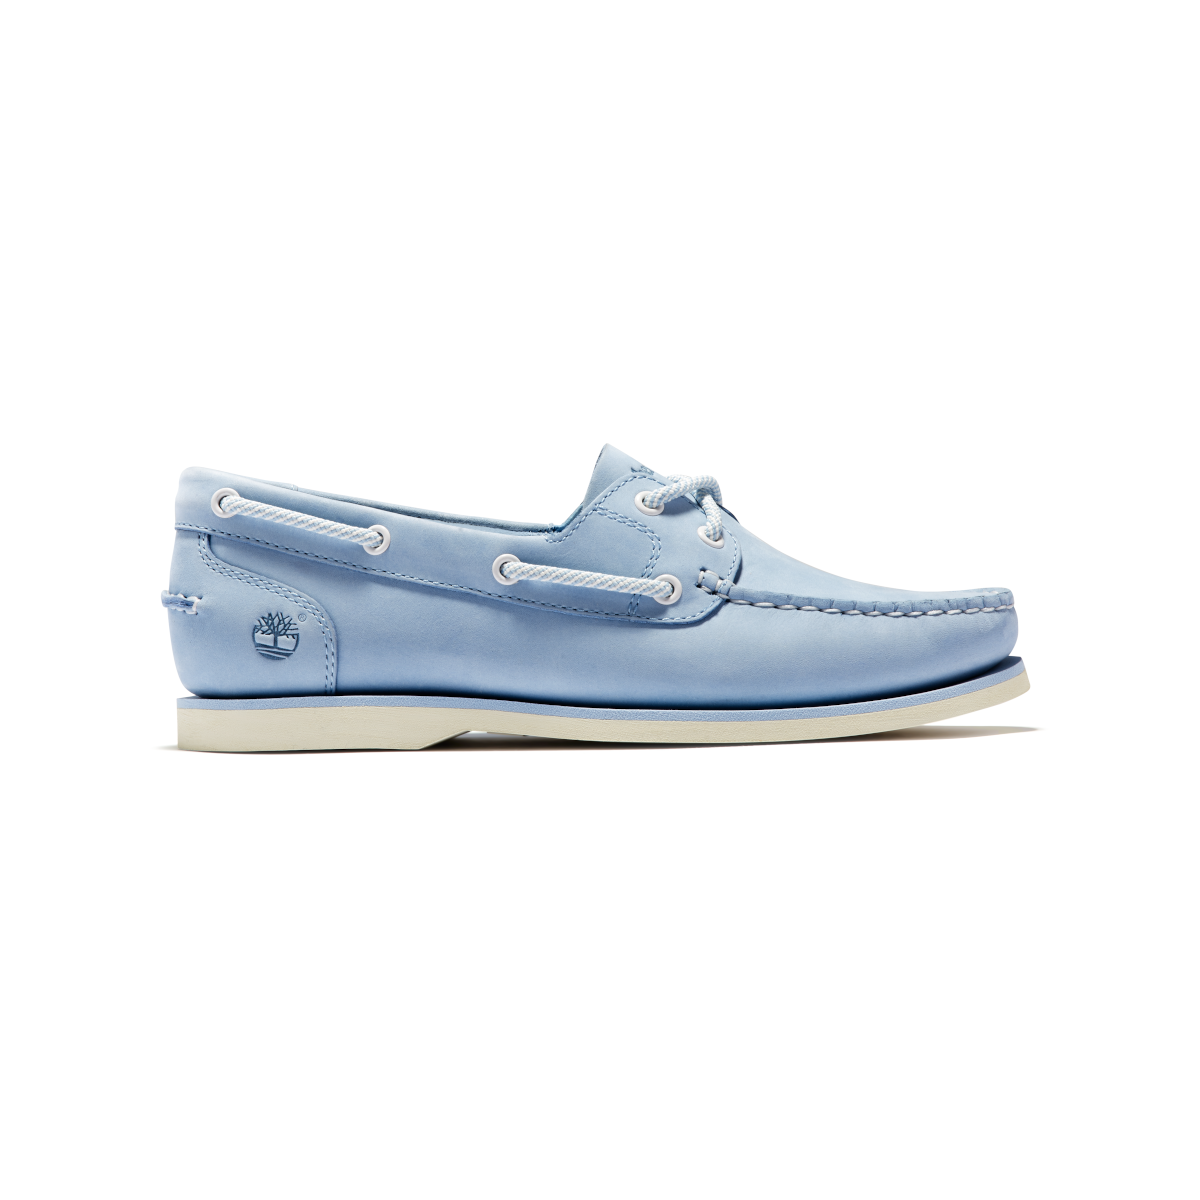 Timberland Classic Boat Unlined chaussure bateau femme bleu poudre, taille 40